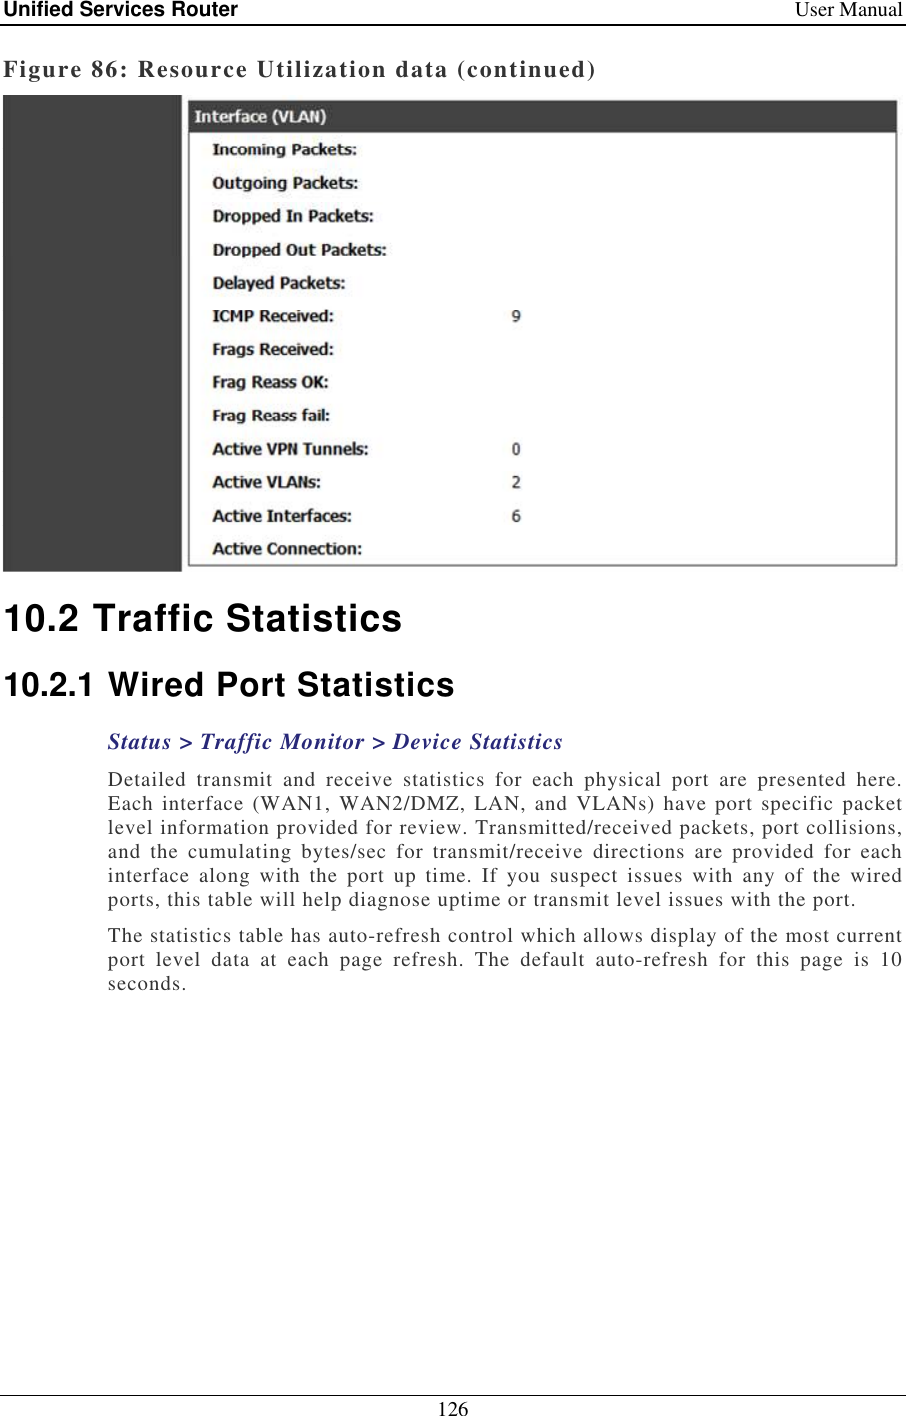 Unified Services Router    User Manual 126  Figure 86: Resource Utilization data (continued)  10.2 Traffic Statistics 10.2.1 Wired Port Statistics Status &gt; Traffic Monitor &gt; Device Statistics Detailed  transmit  and  receive  statistics  for  each  physical  port  are  presented  here. Each interface  (WAN1, WAN2/DMZ, LAN,  and VLANs)  have  port  specific  packet level information provided for review. Transmitted/received packets, port collisions, and  the  cumulating  bytes/sec  for  transmit/receive  directions  are  provided  for  each interface  along  with  the  port  up  time.  If  you  suspect  issues  with  any  of  the  wired ports, this table will help diagnose uptime or transmit level issues with the port.  The statistics table has auto-refresh control which allows display of the most current port  level  data  at  each  page  refresh.  The  default  auto-refresh  for  this  page  is  10 seconds.  